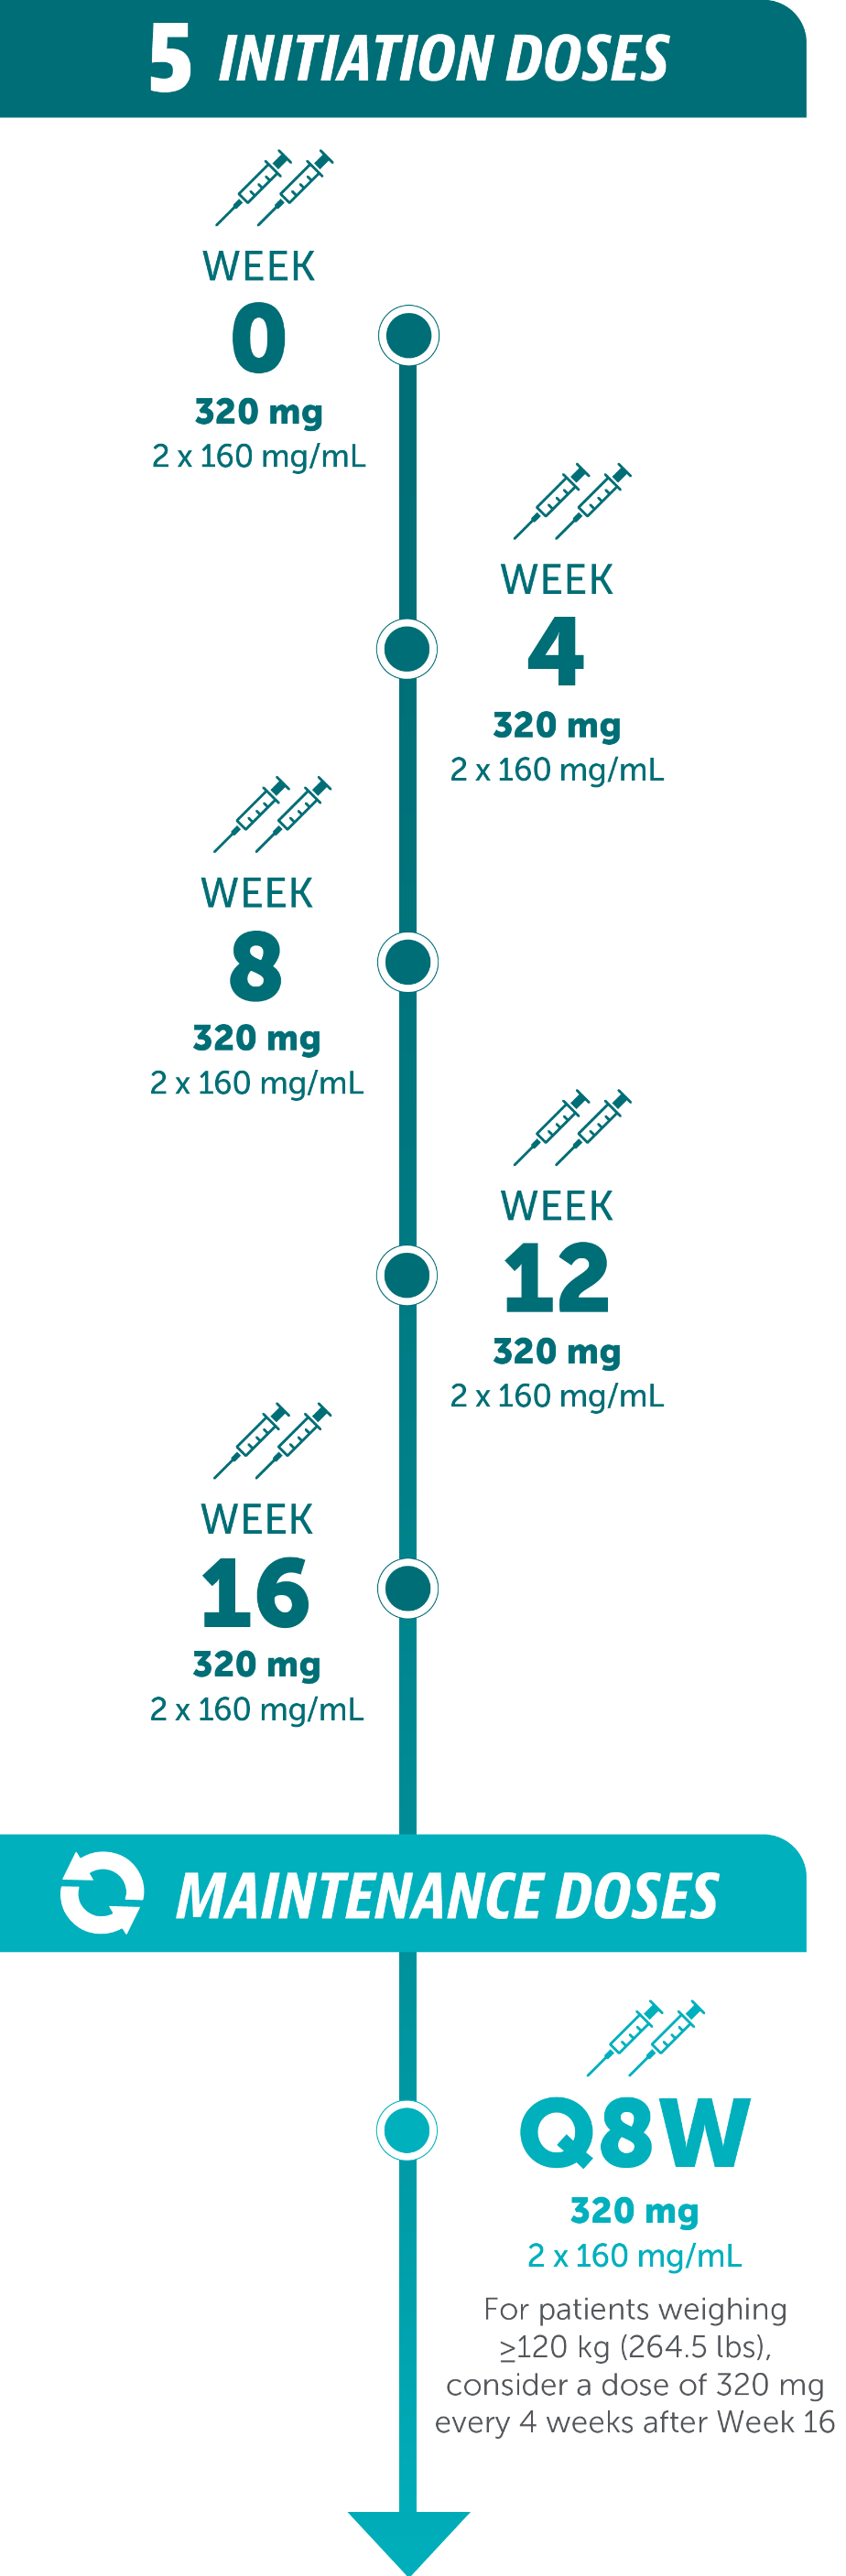 Dark and light teal graphic with dosing syringes indicates BIMZELX dosing schedule for initiation doses and maintenance doses